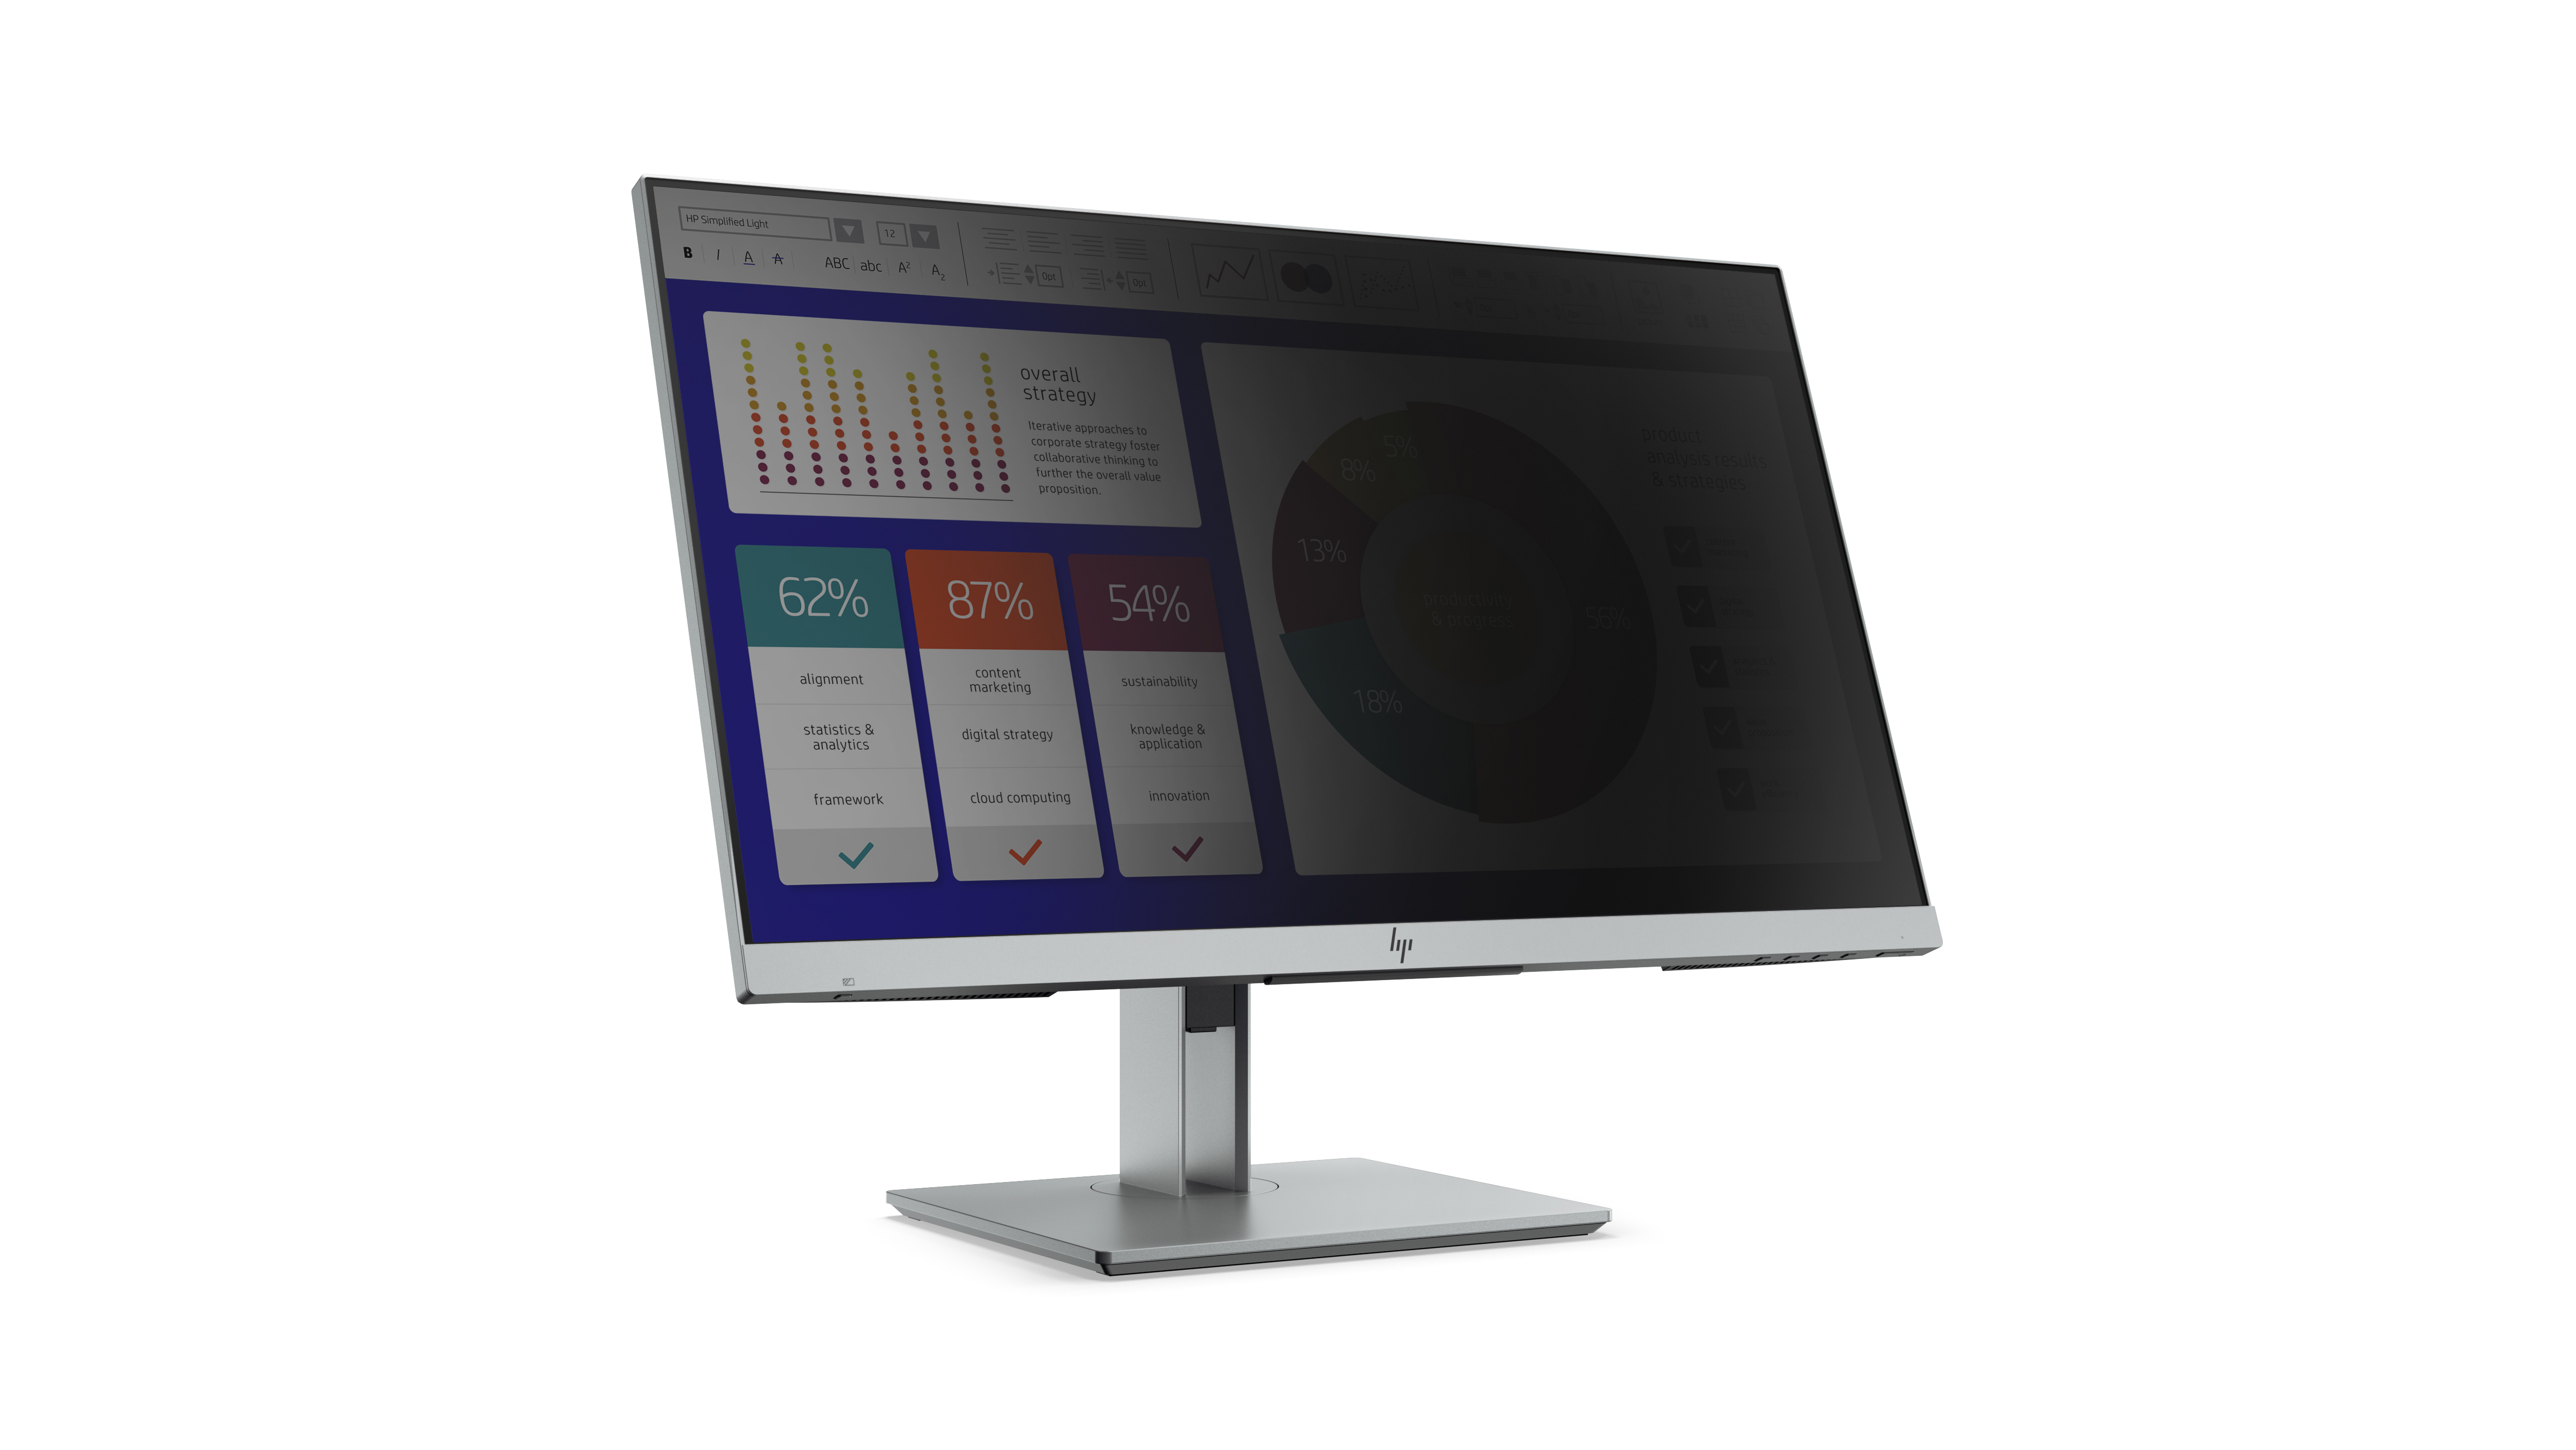 hp launches new monitors and all in one ces 2019 elitedisplay e243p sure view monitor front right w